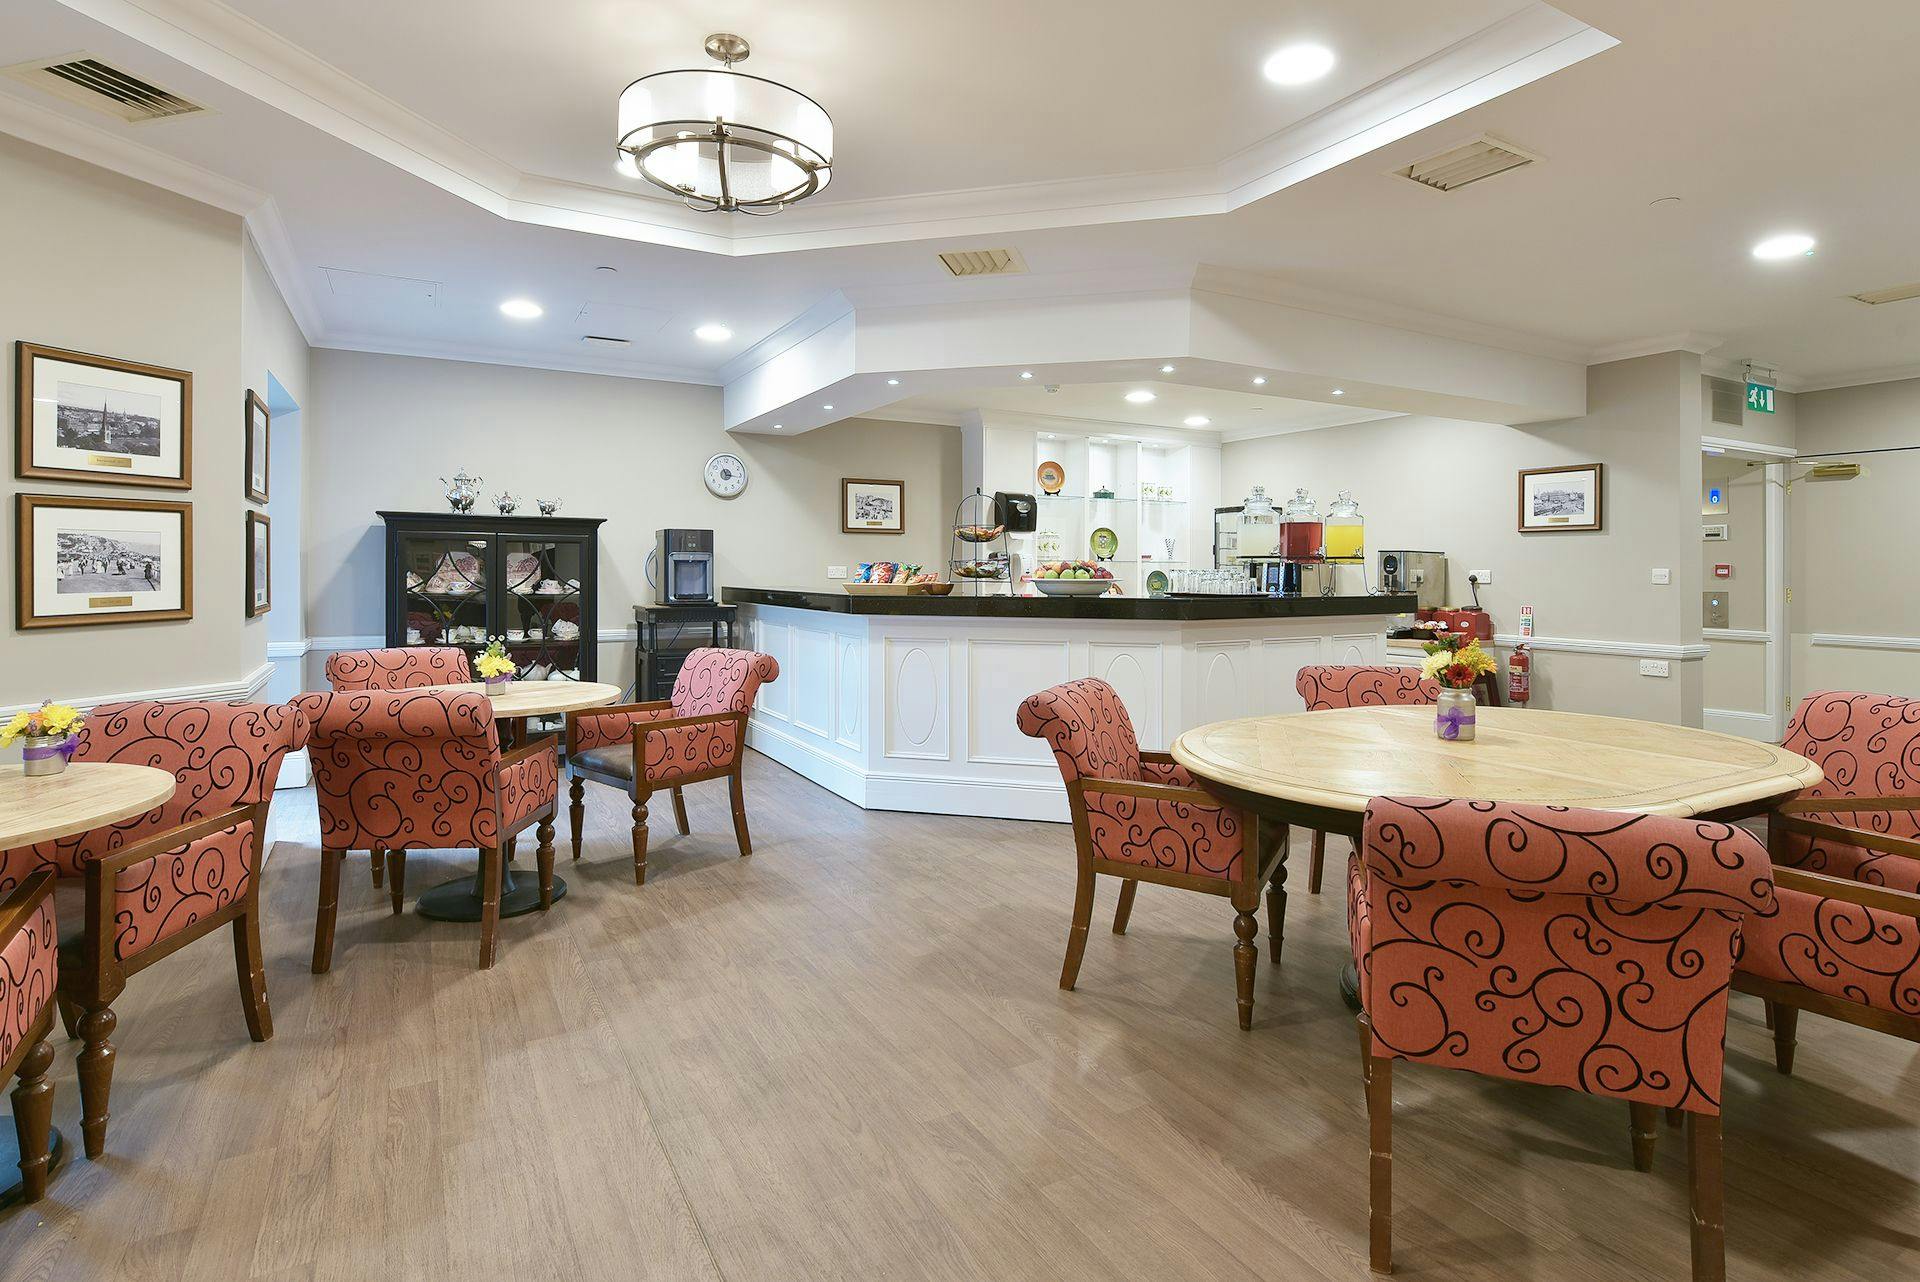 Dining area of Westbourne Tower care home in Bournemouth, Hampshire